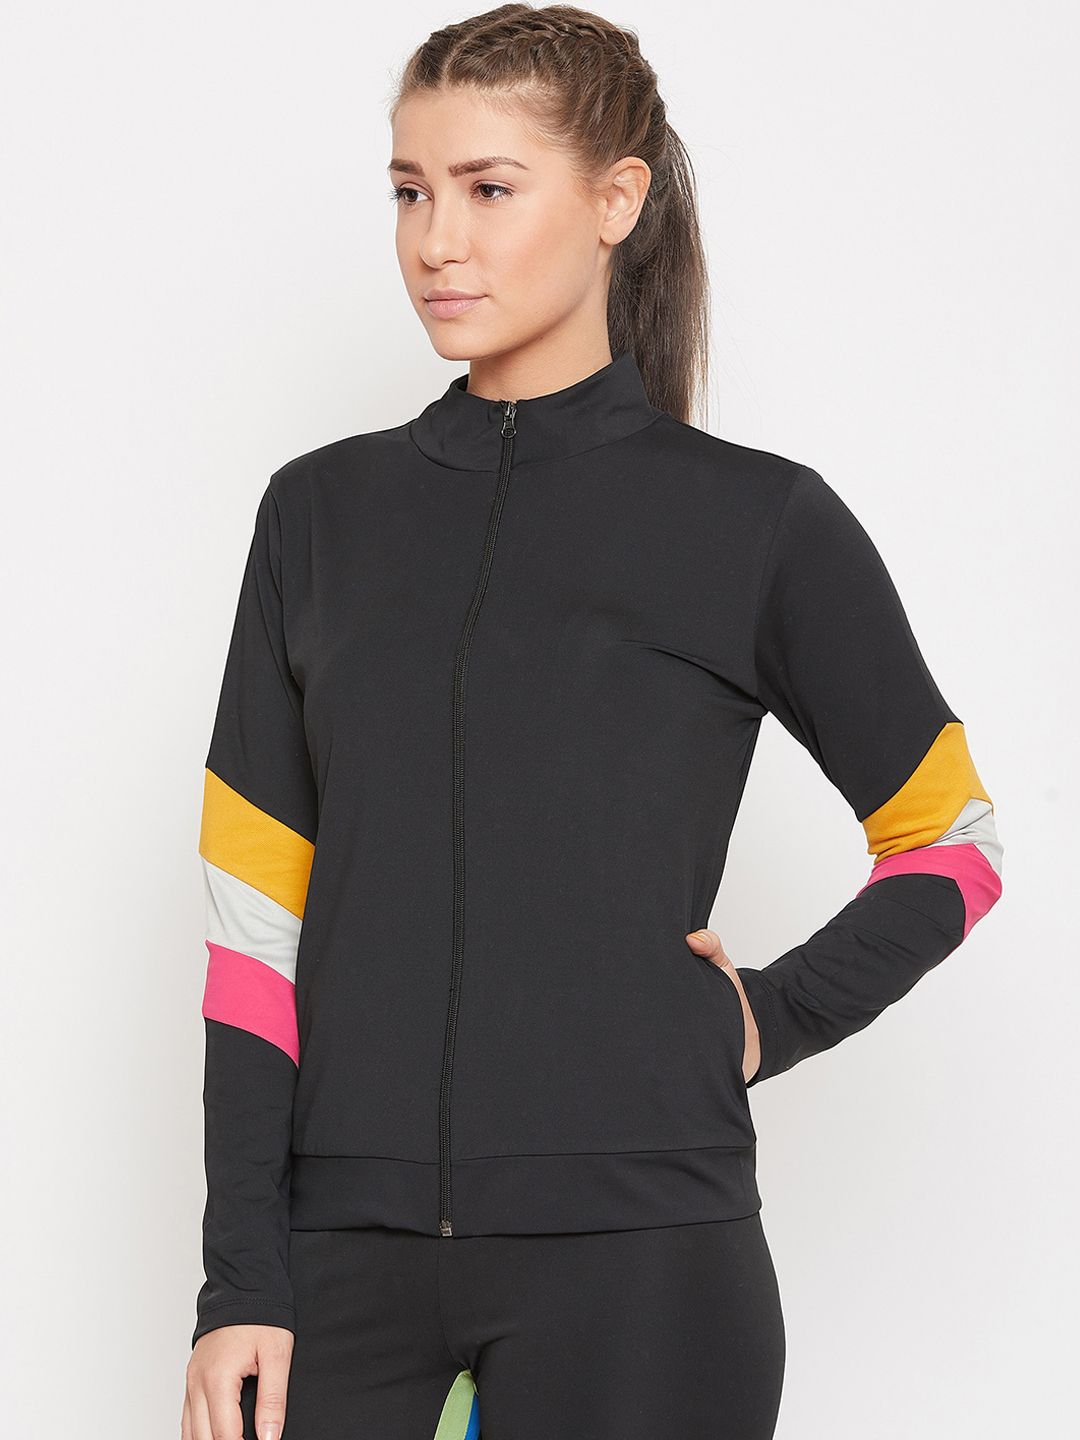 PERFKT-U Women Black Windcheater Antimicrobial Training or Gym Sporty Jacket Price in India